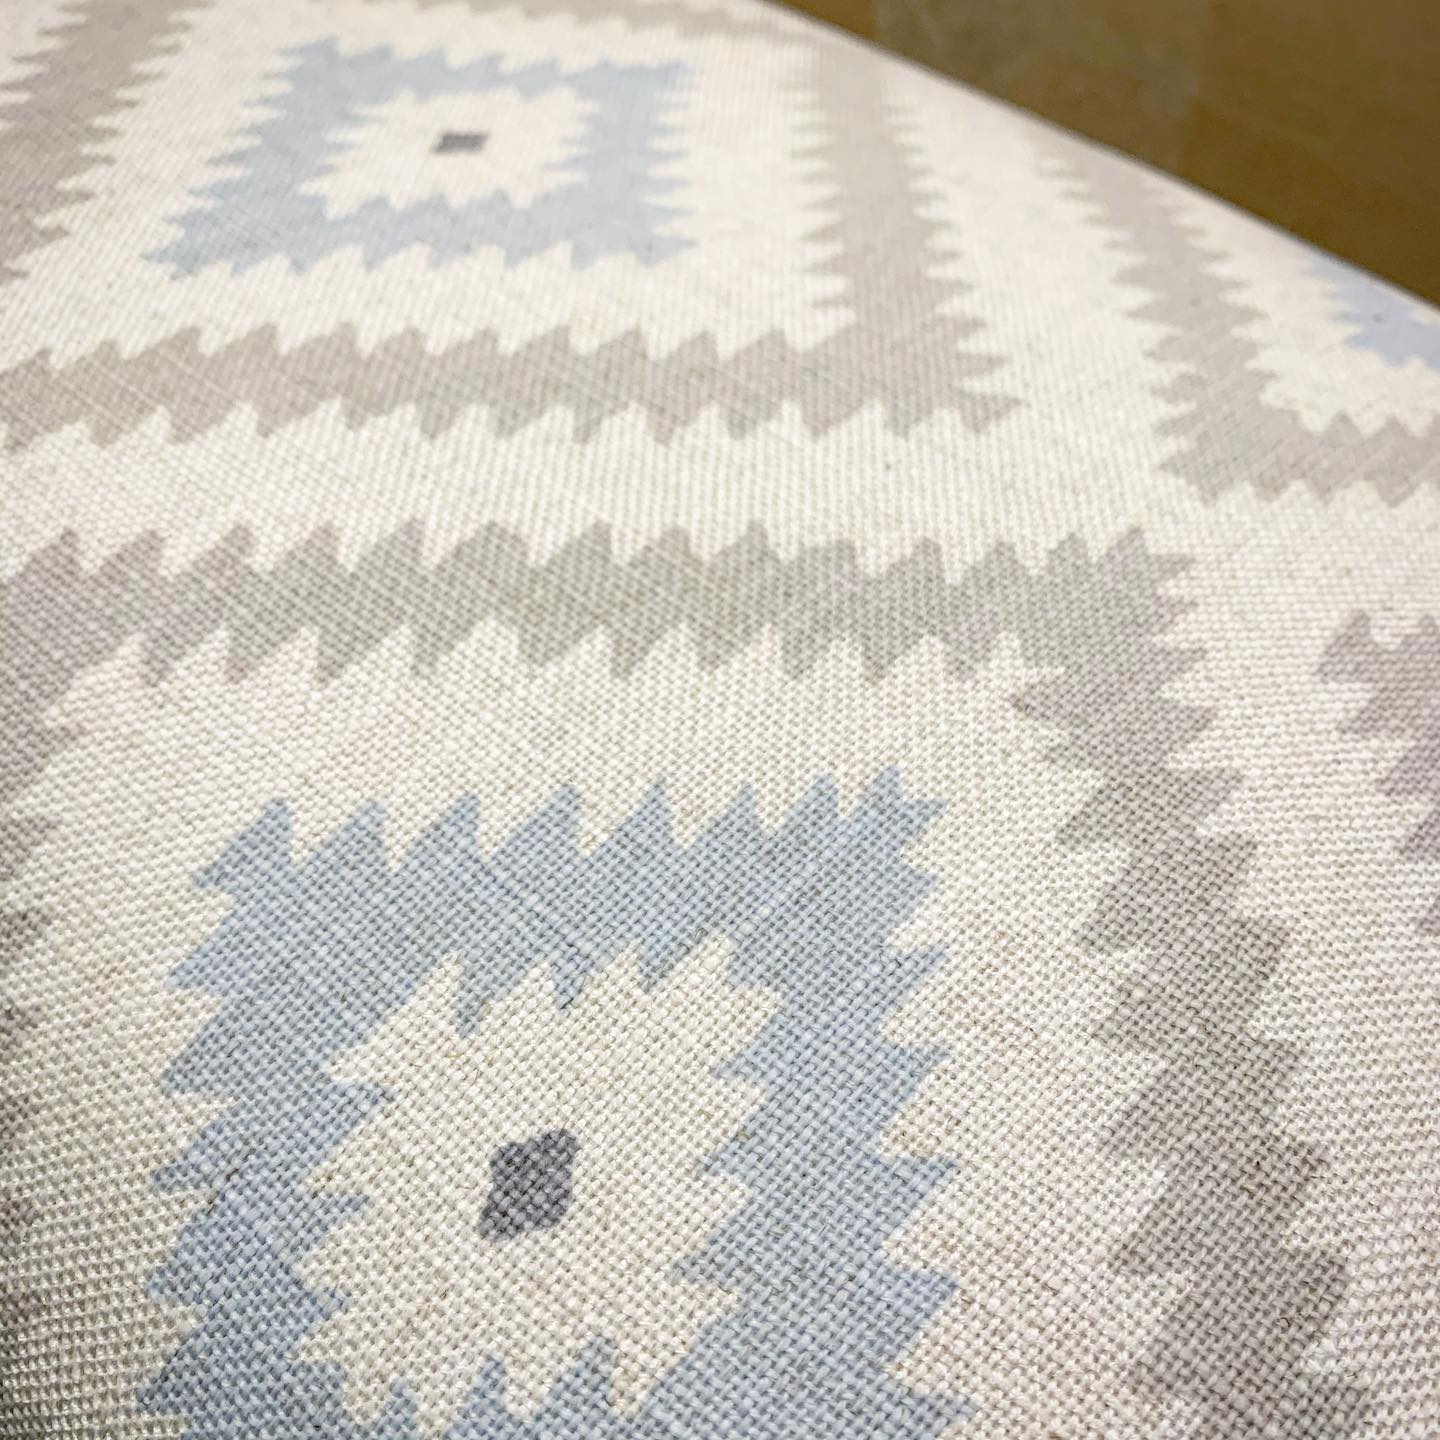 We’ve been working on an ottoman today using this lovely Kilim style fabric. Look out for this design and more over the weekend at Clevedon’s virtual April Market.Head to Facebook on Saturday and Sunday from 8am to 5pm Join the group below to browse our products and many more!https://www.facebook.com/groups/April20clevedonsundaymarket/Traders will go live Sat 4th & Sun 5th to post their goods- please comment SOLD to engage in buying- the traders will contact you!The group will remain live until 10th April to give you all time to view ️...#virtualmarket #shoponline #thewondersofsocialmedia #community #independentbusiness #supportsmallbusiness #clevedon #april #aztec #kilim #fabric